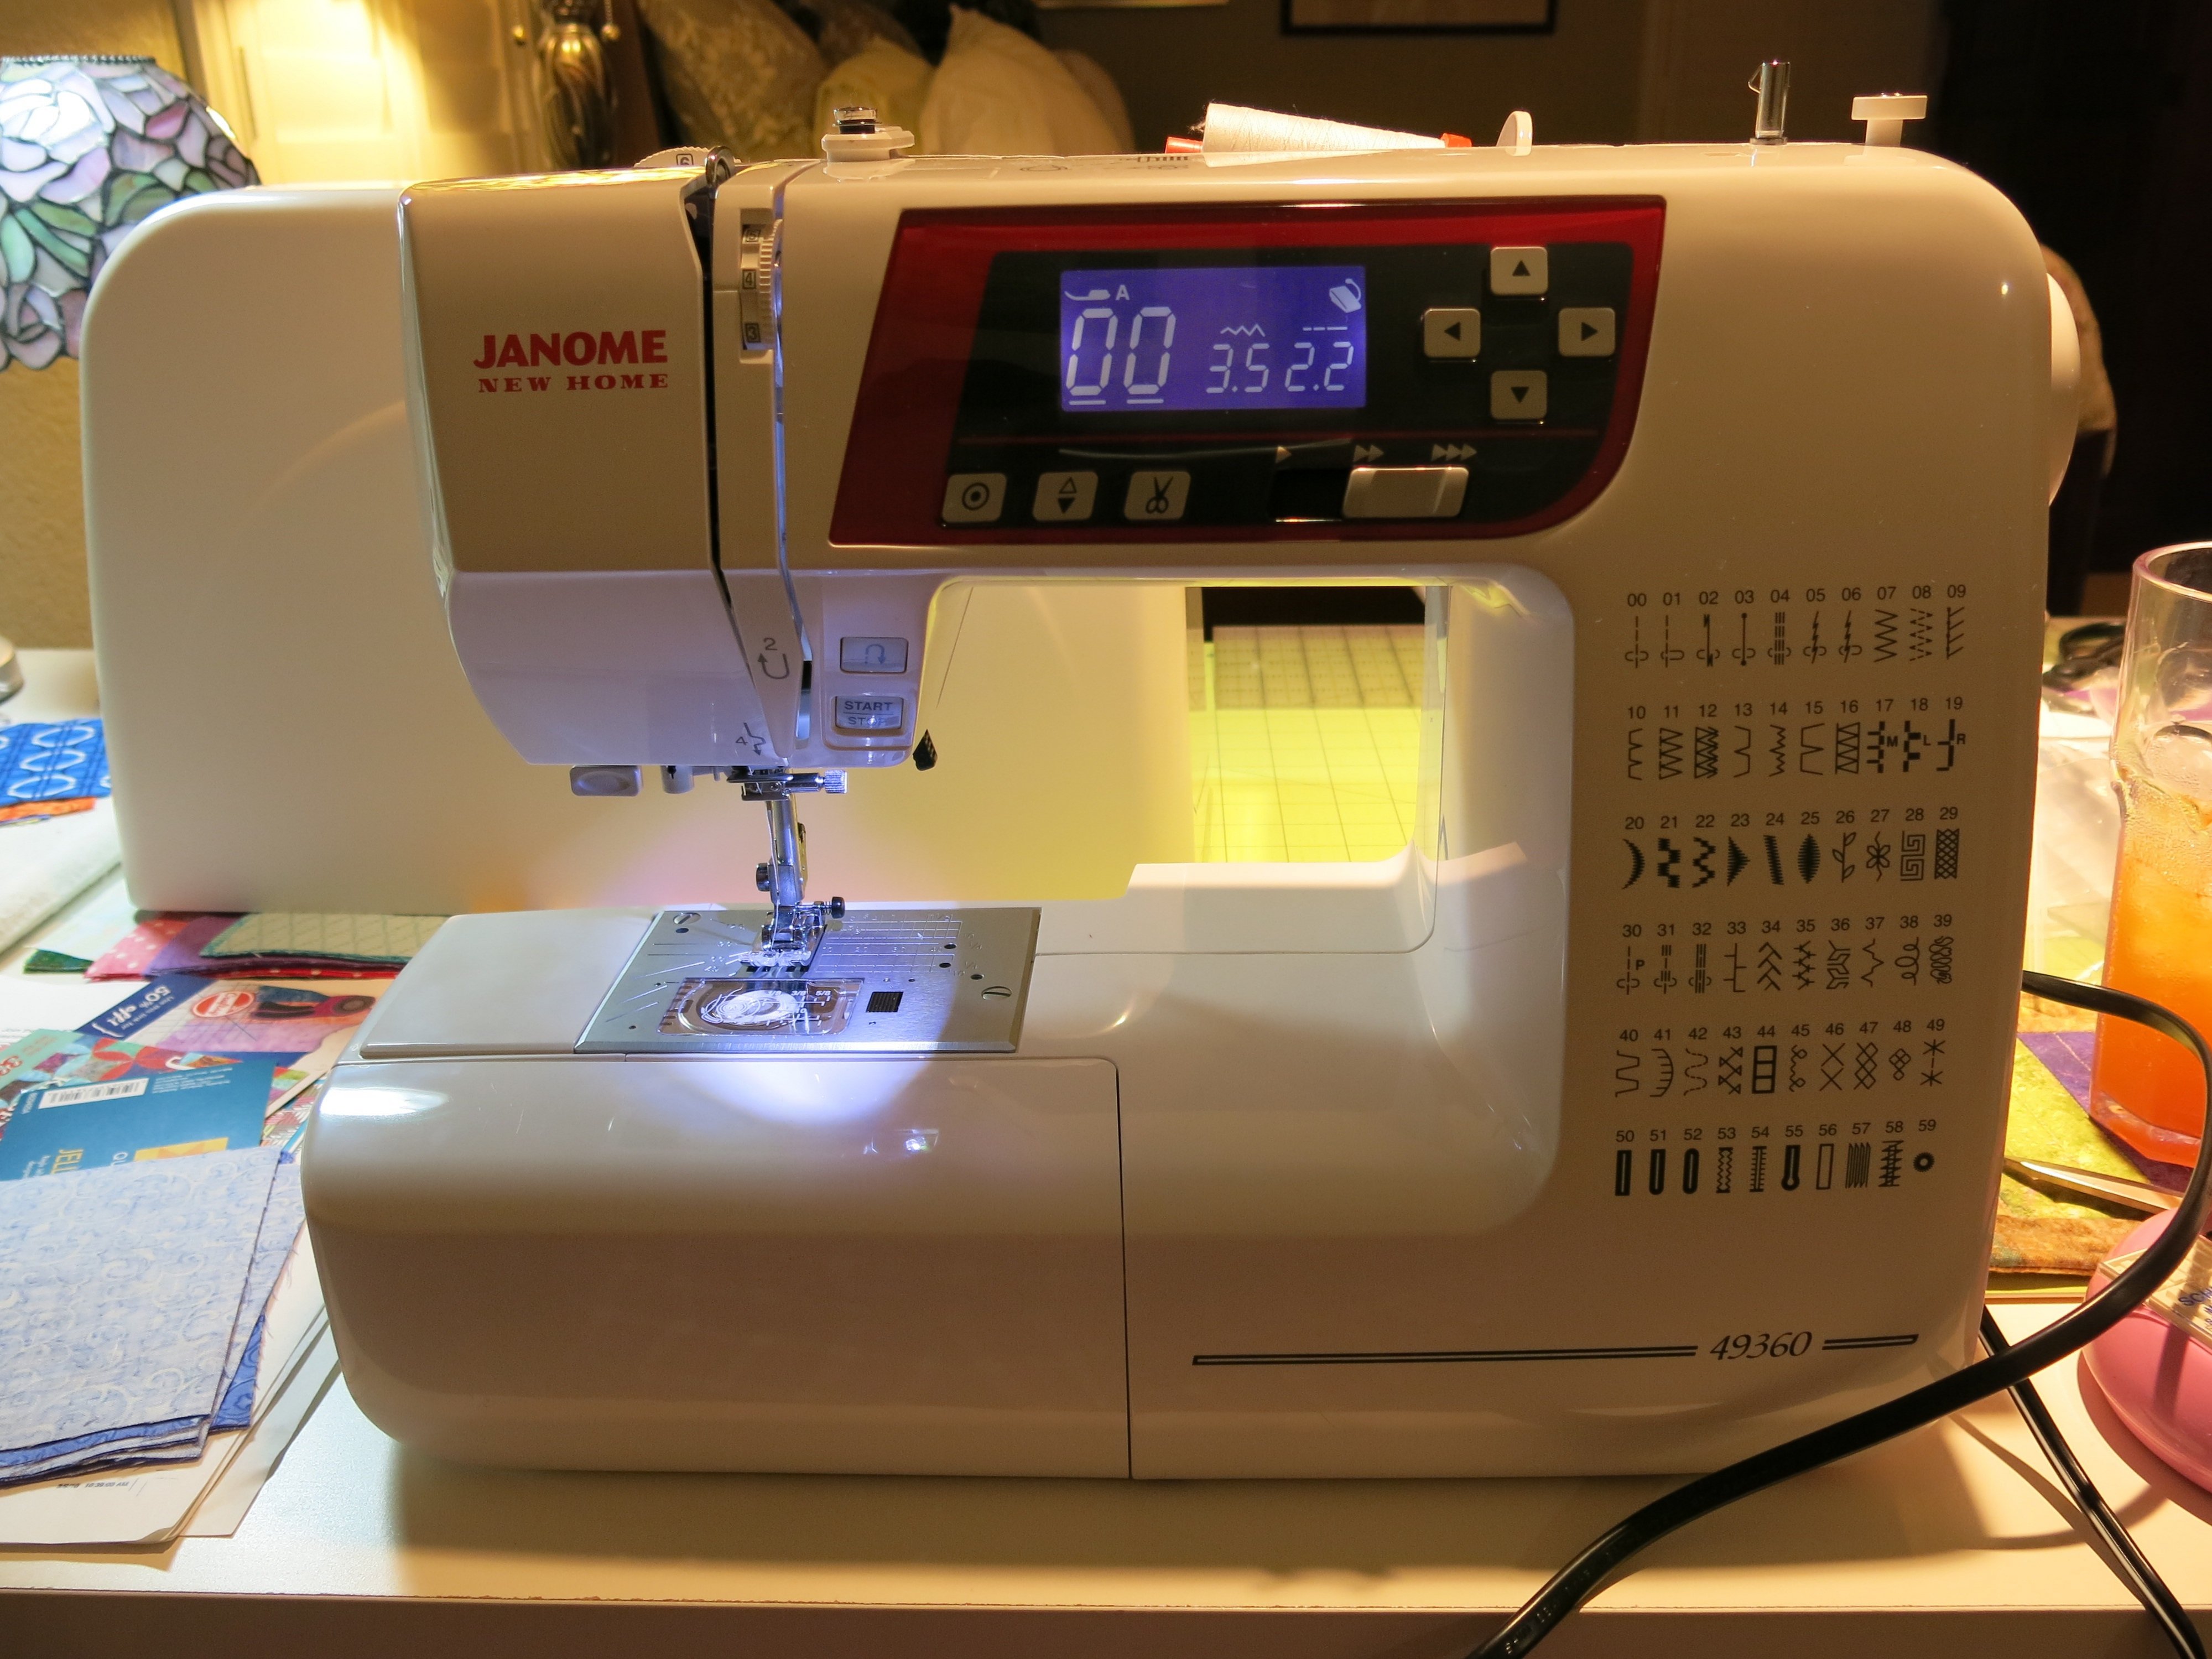 Best Janome Sewing Machines: Top 10